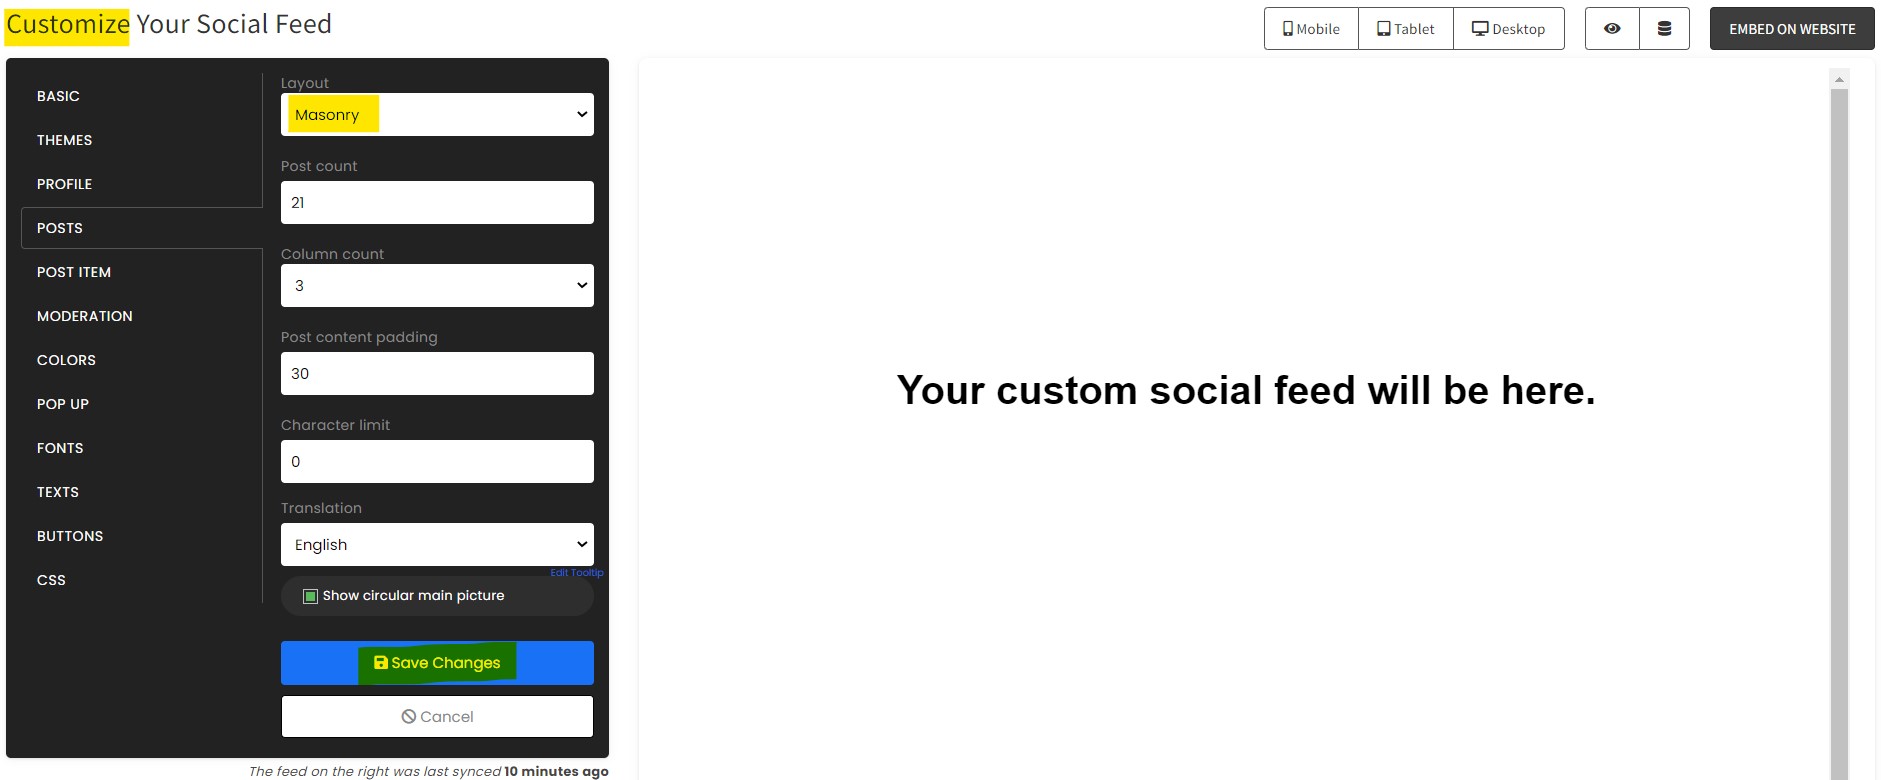 Customize your feed - How to embed Twitch feed on your Shopify website for FREE?